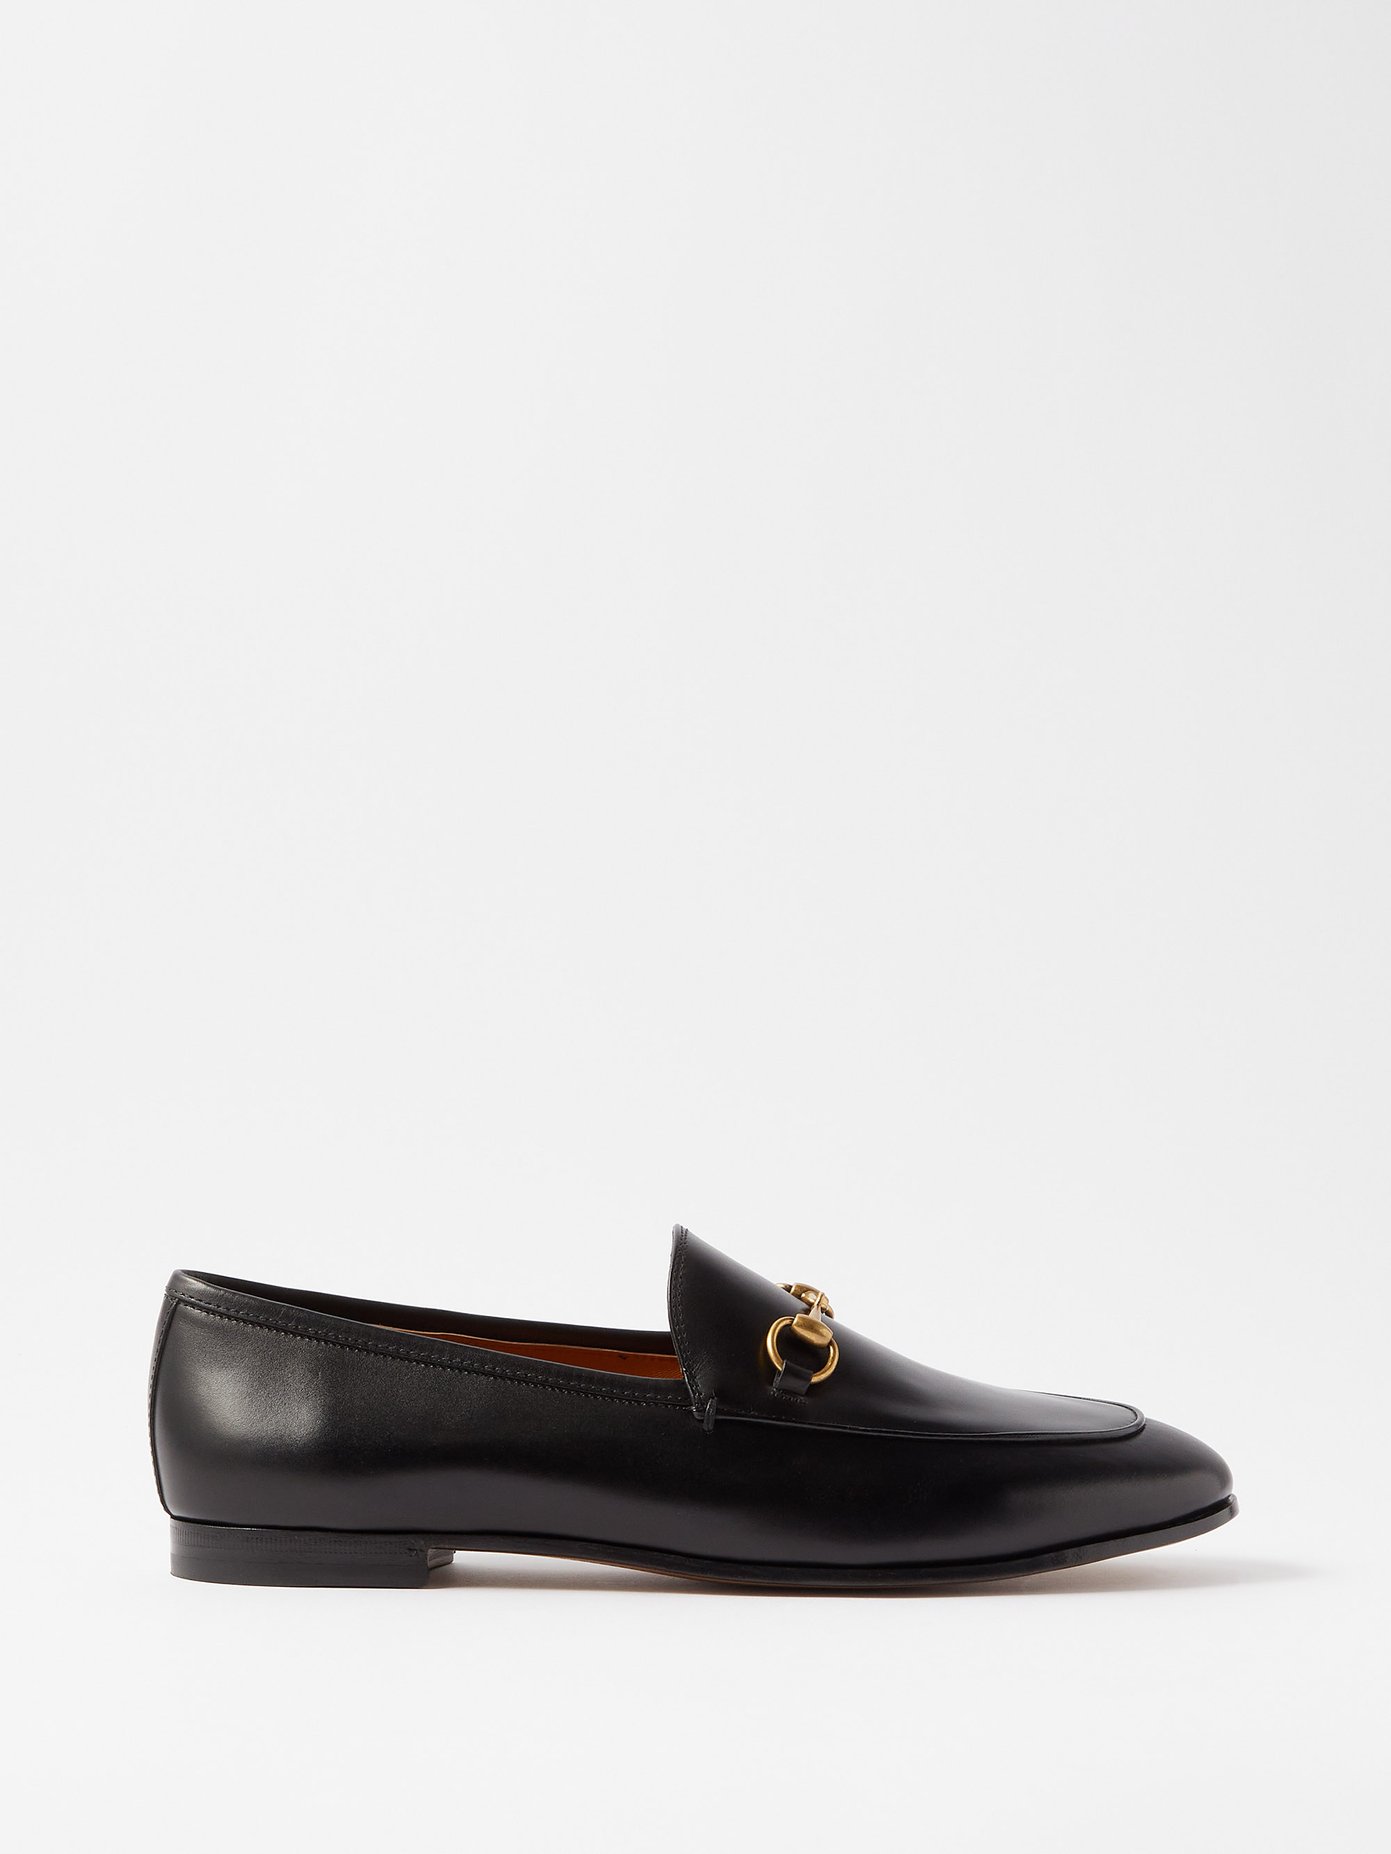 Jordaan leather loafers | Gucci 